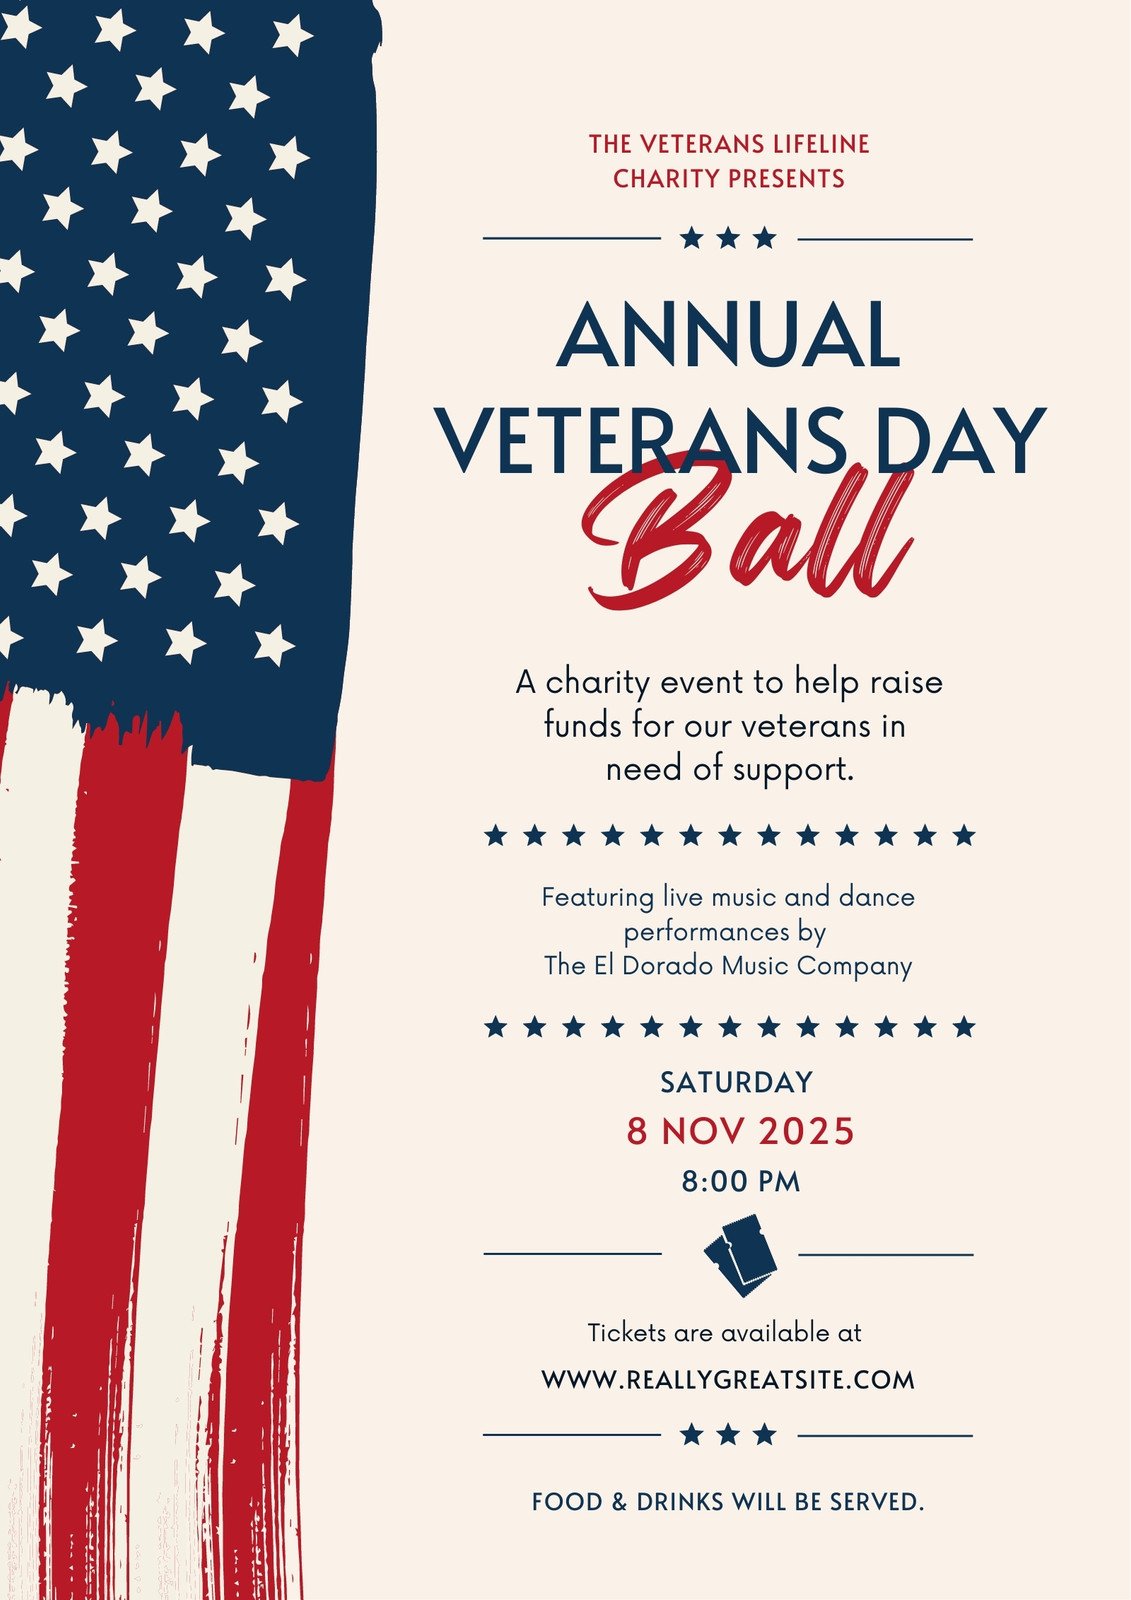 Free Veterans Day Event Flyer Template - Download in Word, Google